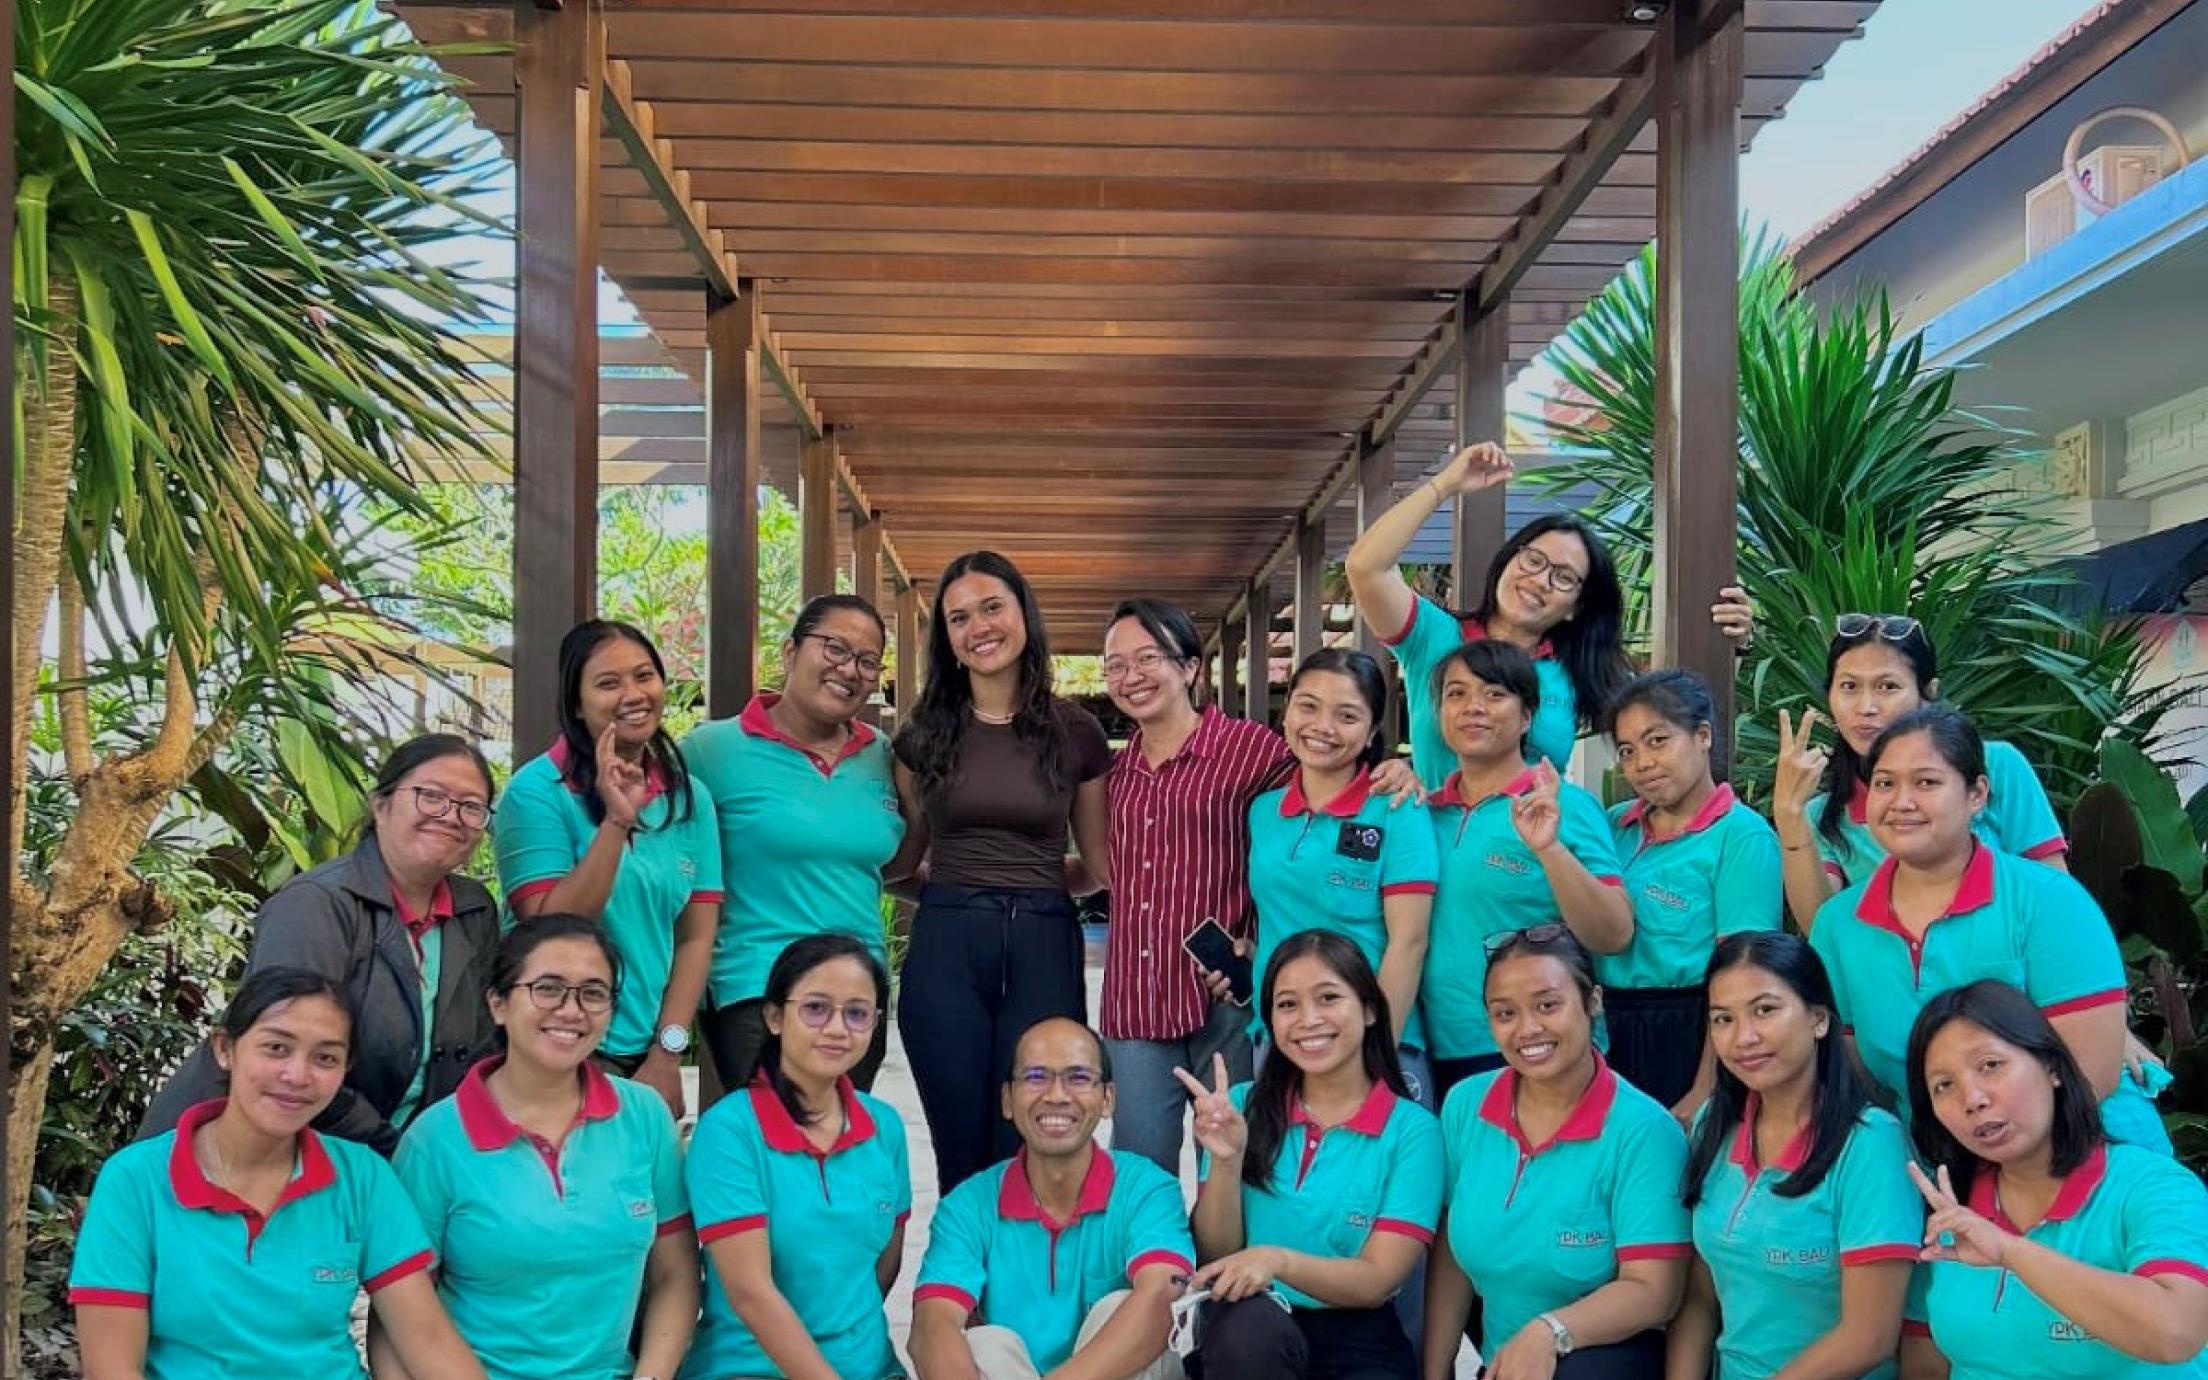 Tanisha poses with the YPK team in Bali